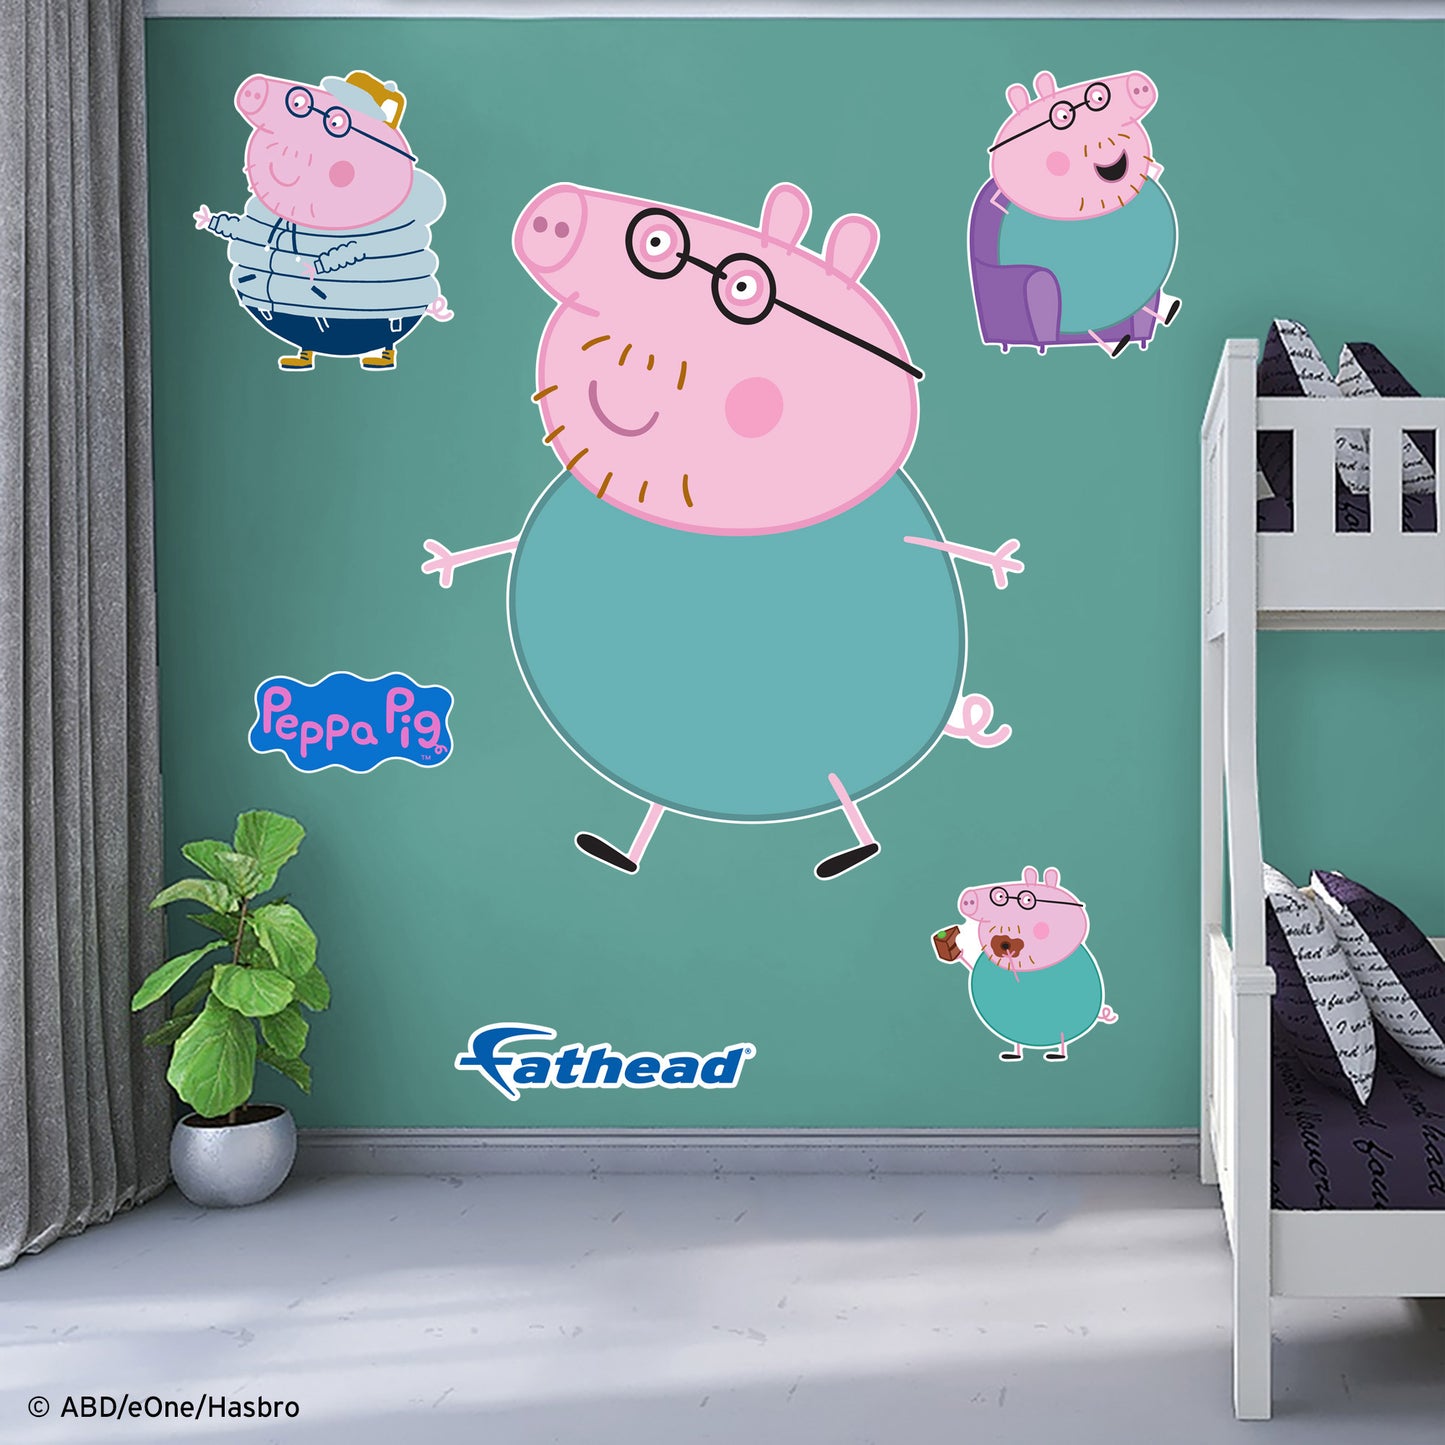 Life-Size Character +5 Decals (45"W x 32.5"H)